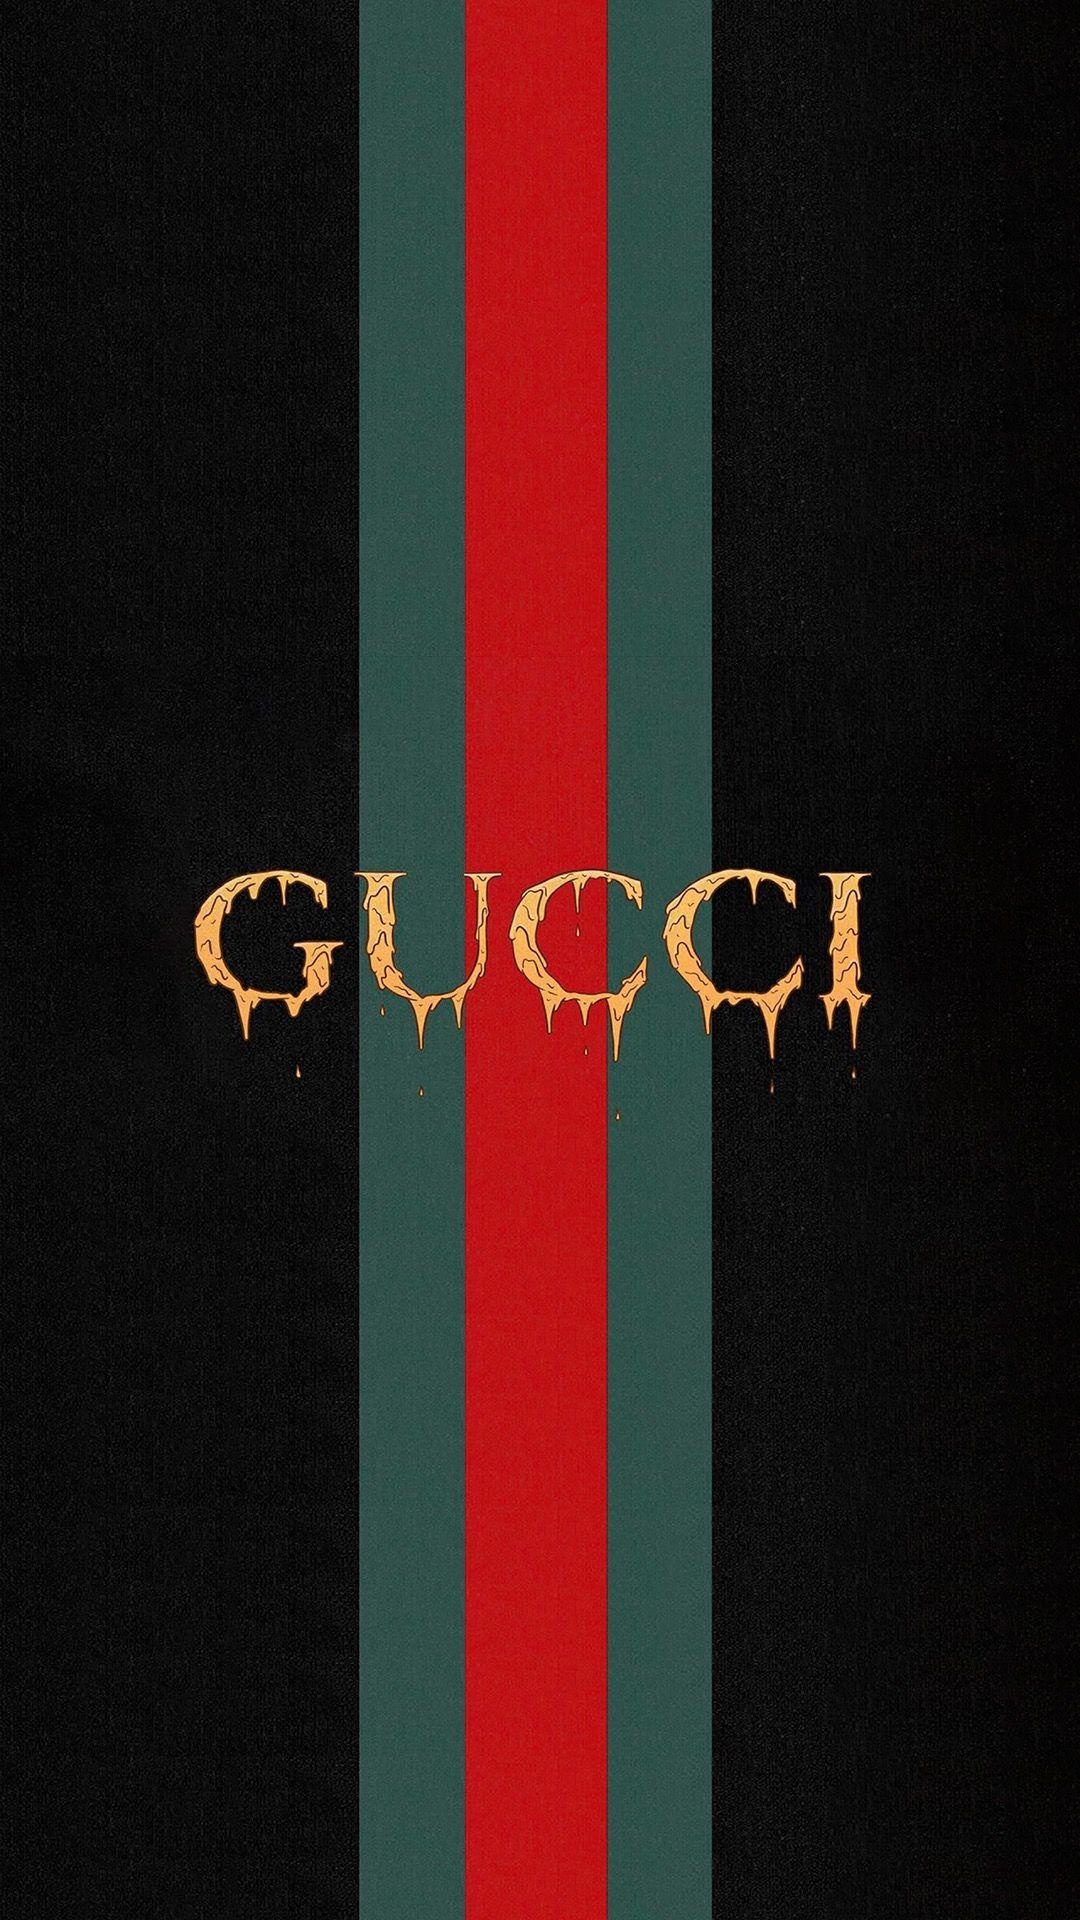 Supreme Gucci wallpapers, Luxury fashion, Trendy designs, Stylish backgrounds, 1080x1920 Full HD Phone